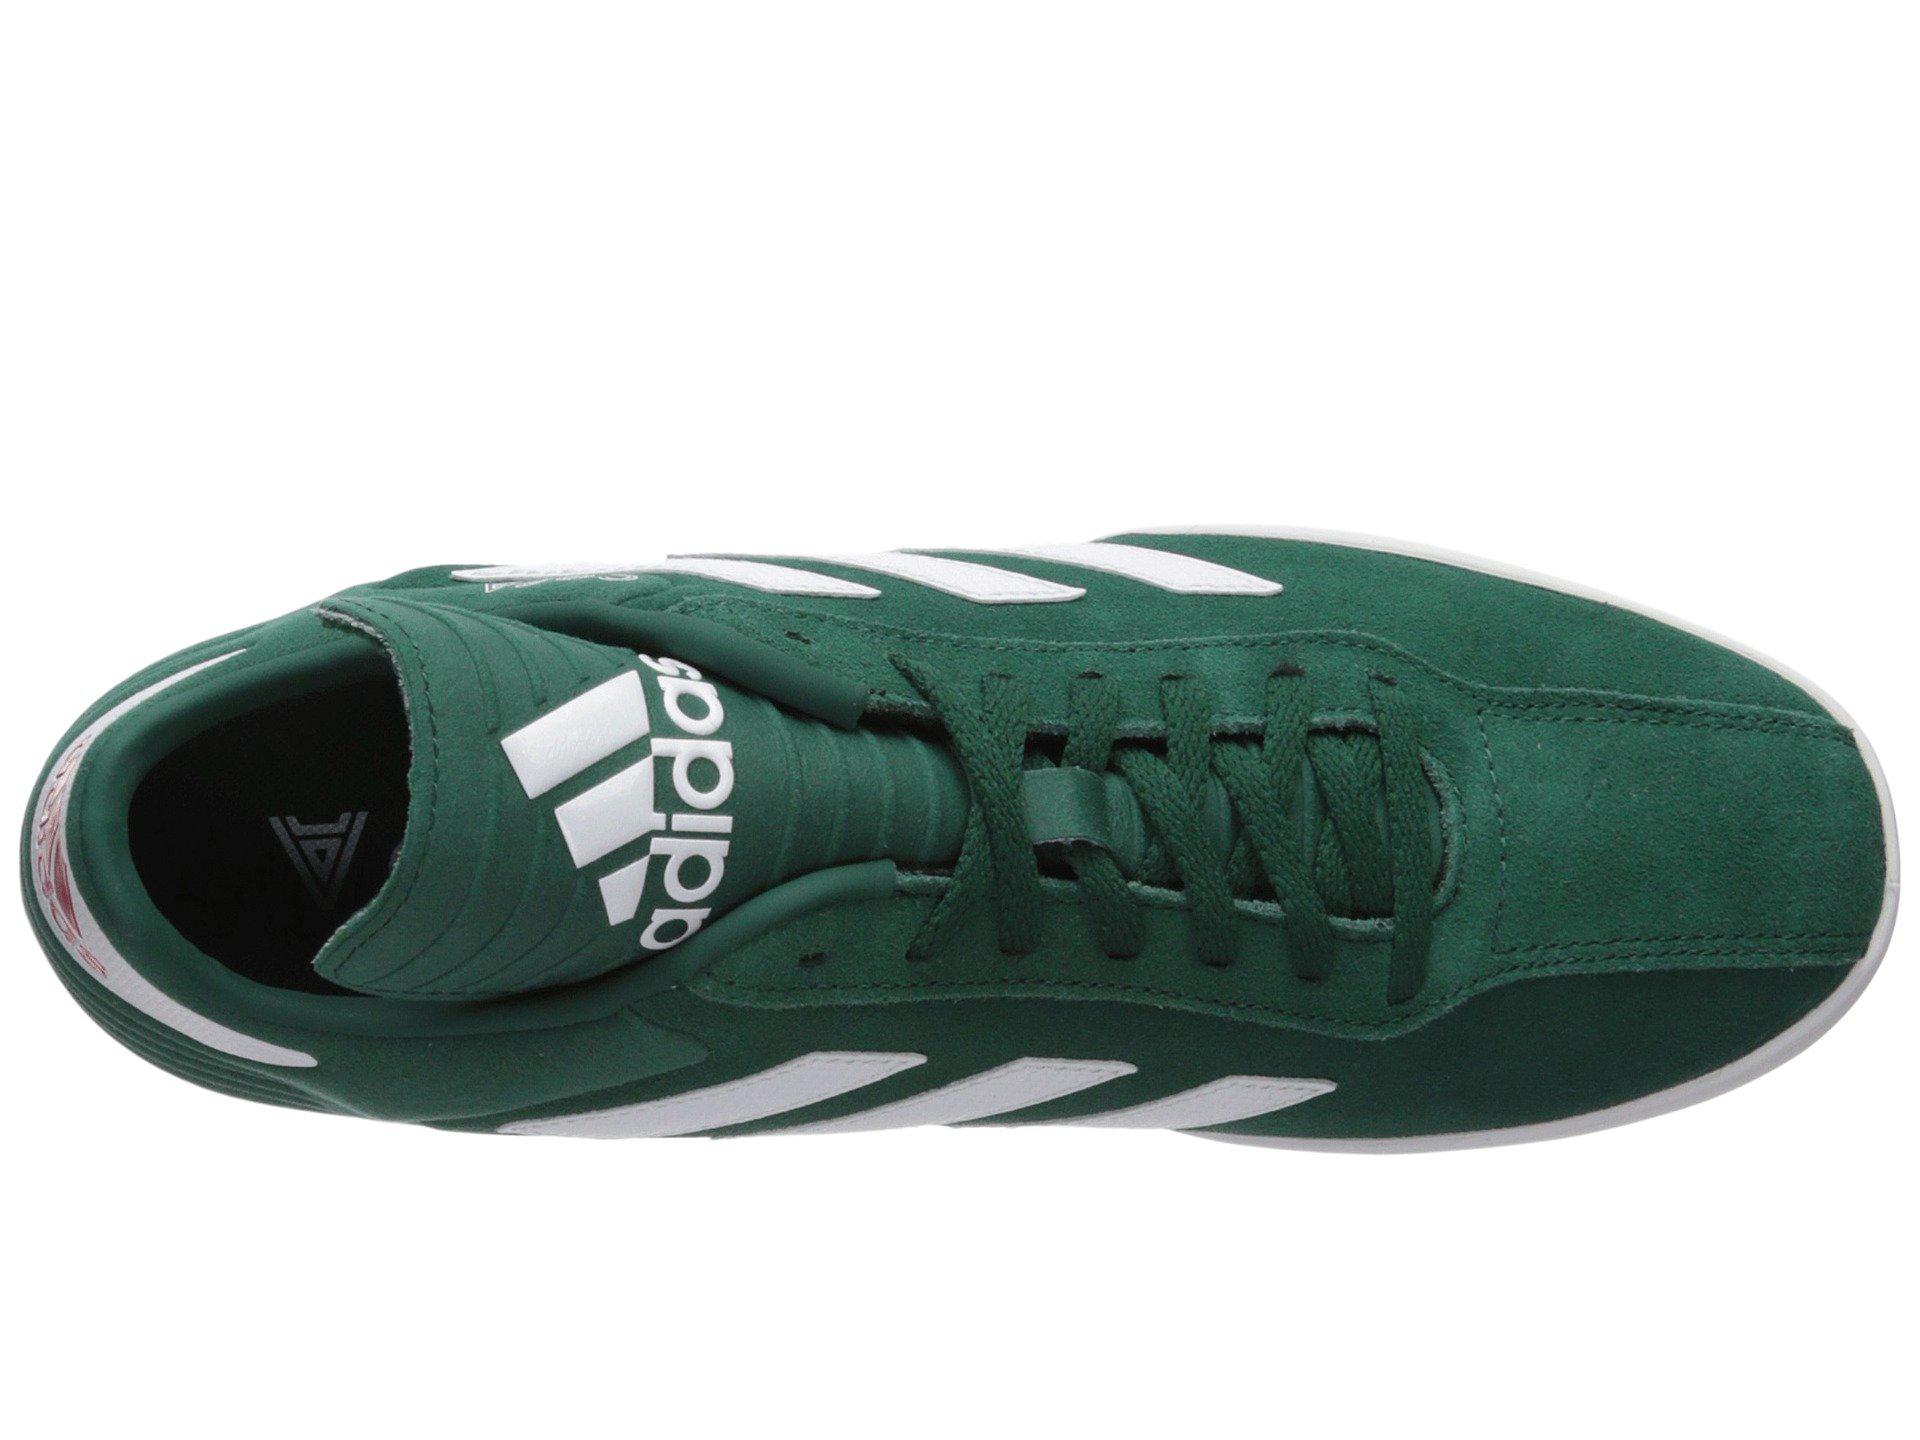 adidas Synthetic Copa Super Soccer Shoe in Green/White/Scarlet (Green) for  Men | Lyst